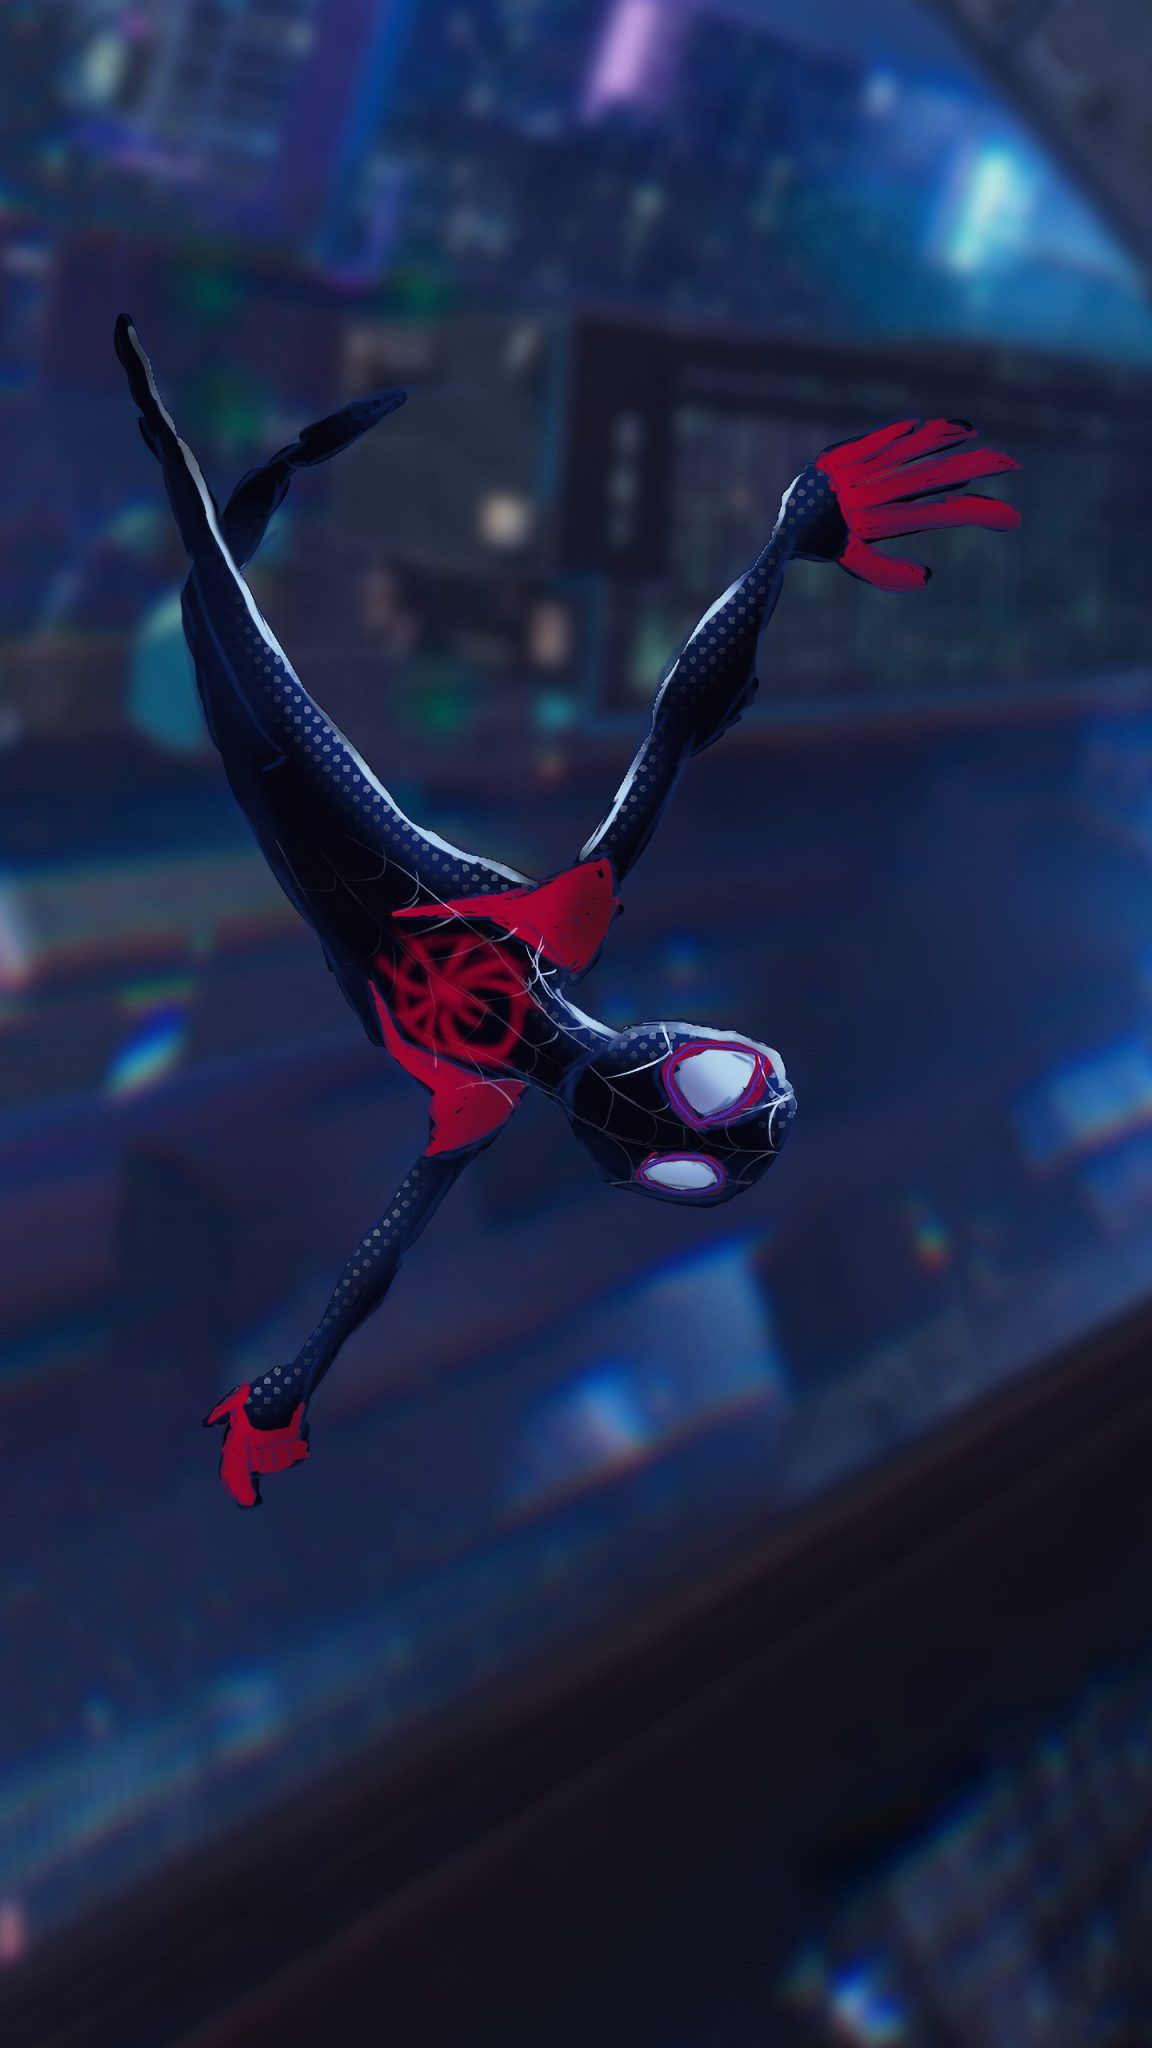 Top Spiderman Wallpaper Ps4 Homeing Into The Spider Verse